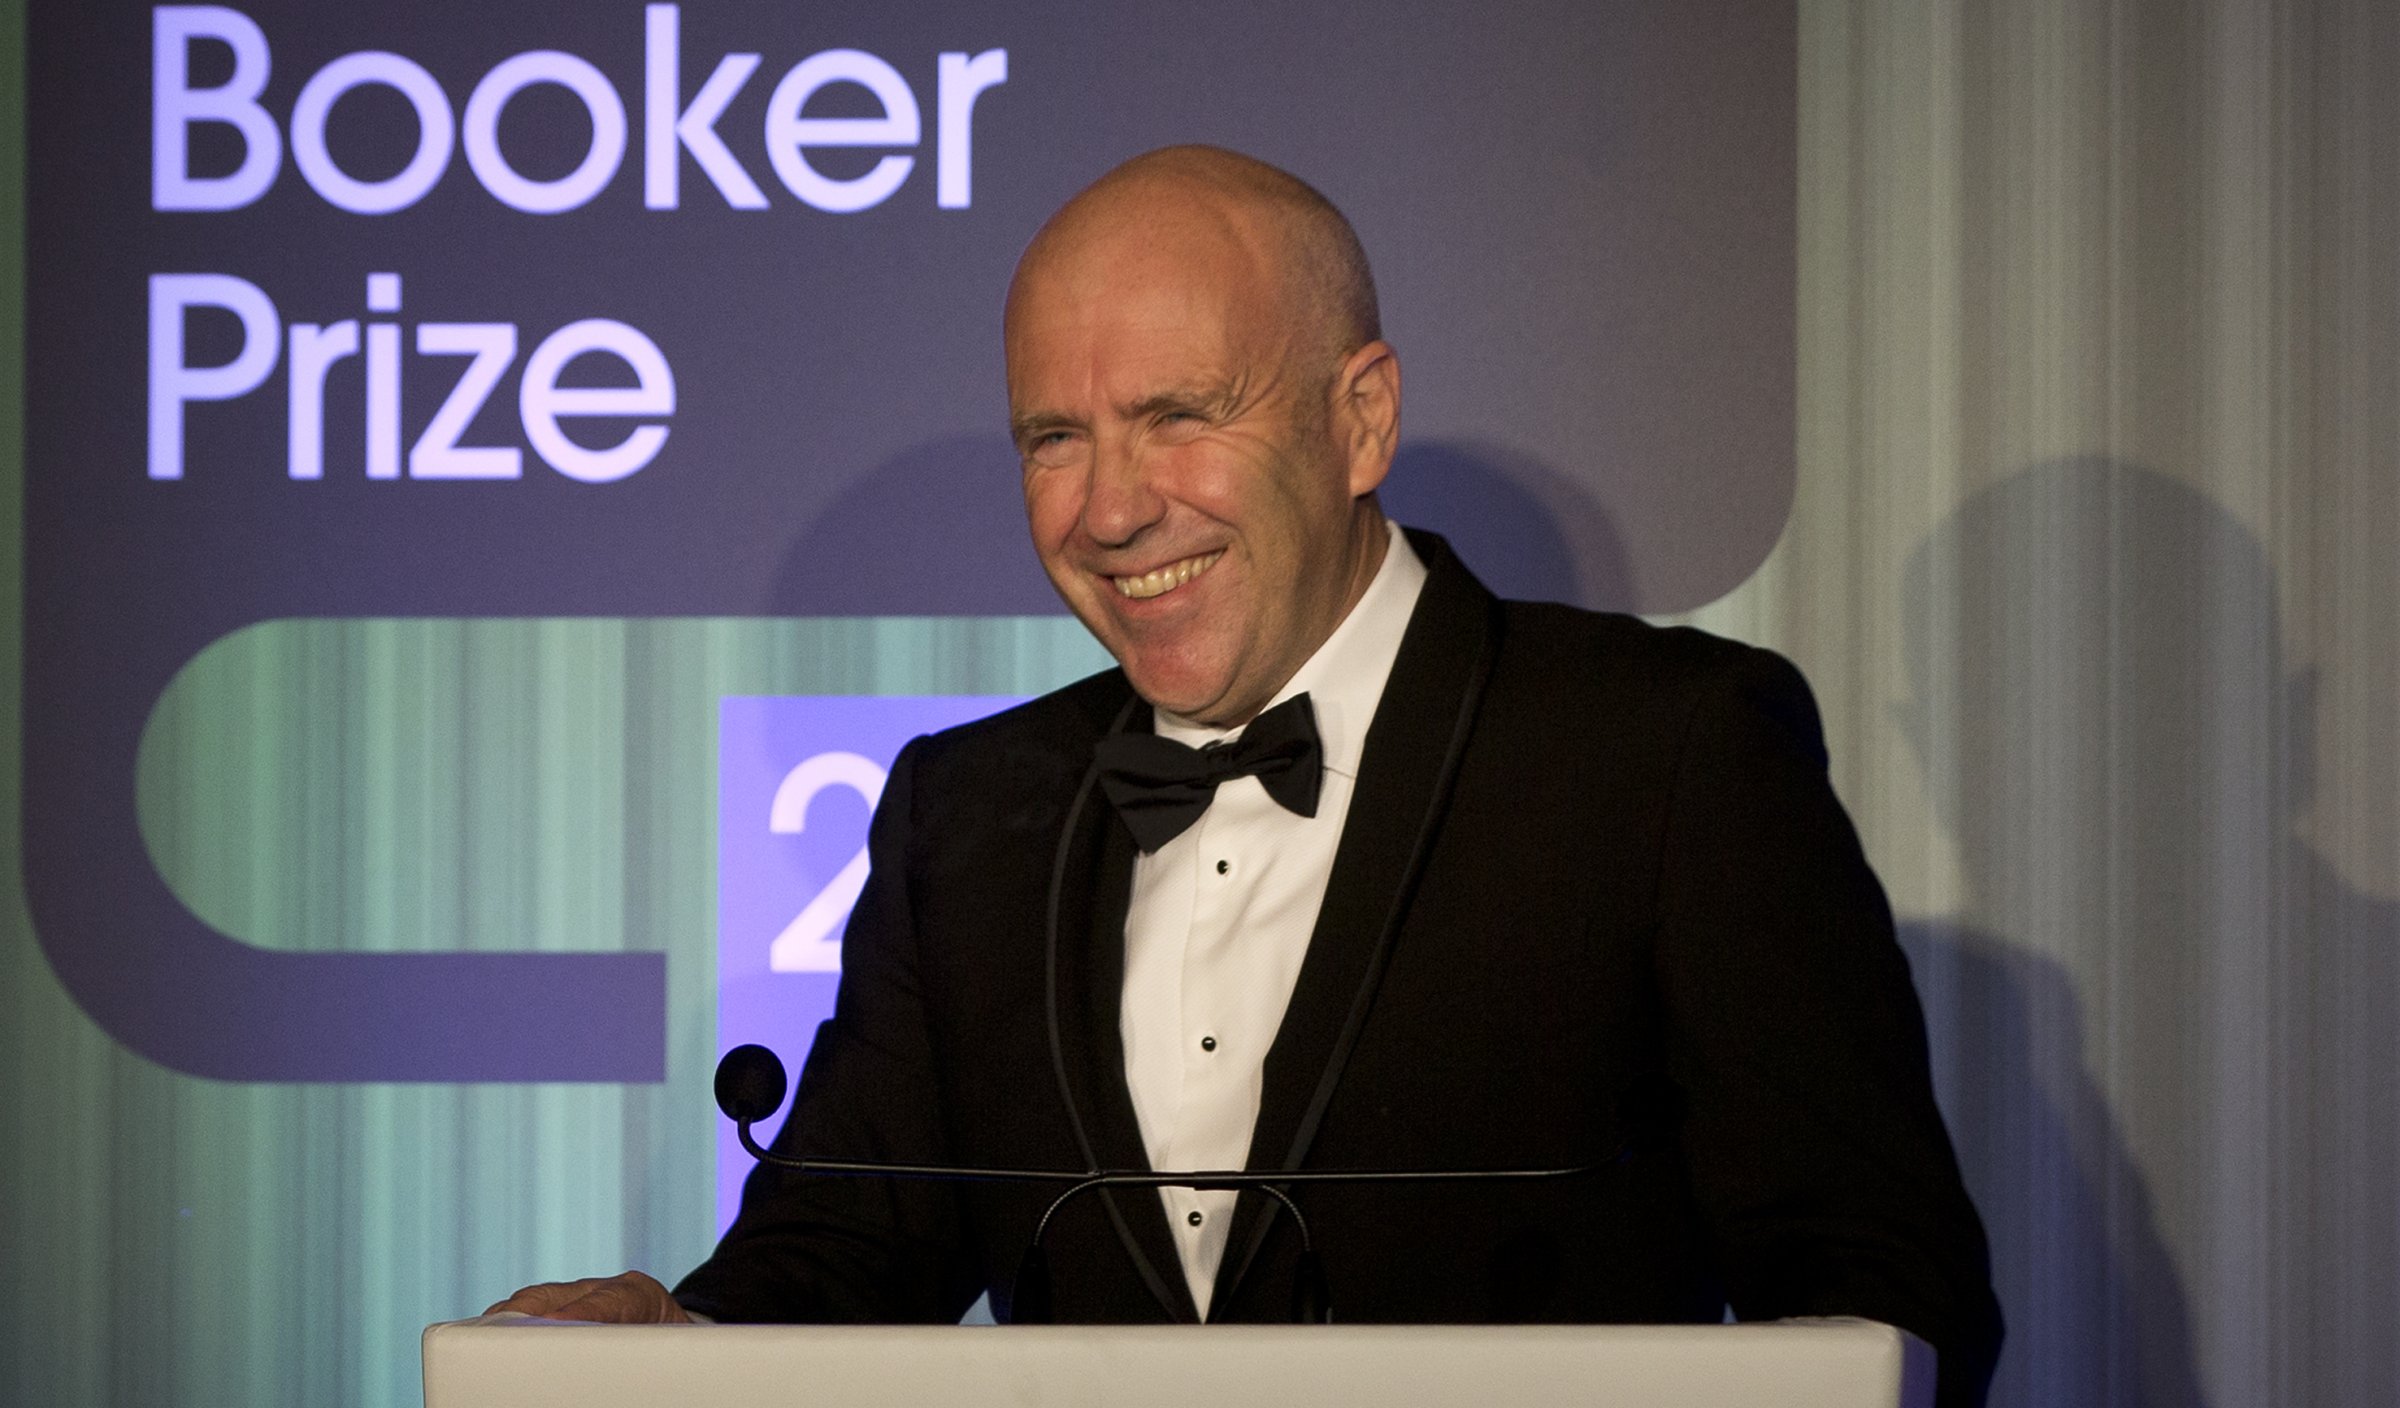 Australian author Richard Flanagan, author of 'The Narrow Road to the Deep North' speaks after winning the prize at the awards dinner, at the Guildhall on Oct. 14, 2014 in London.